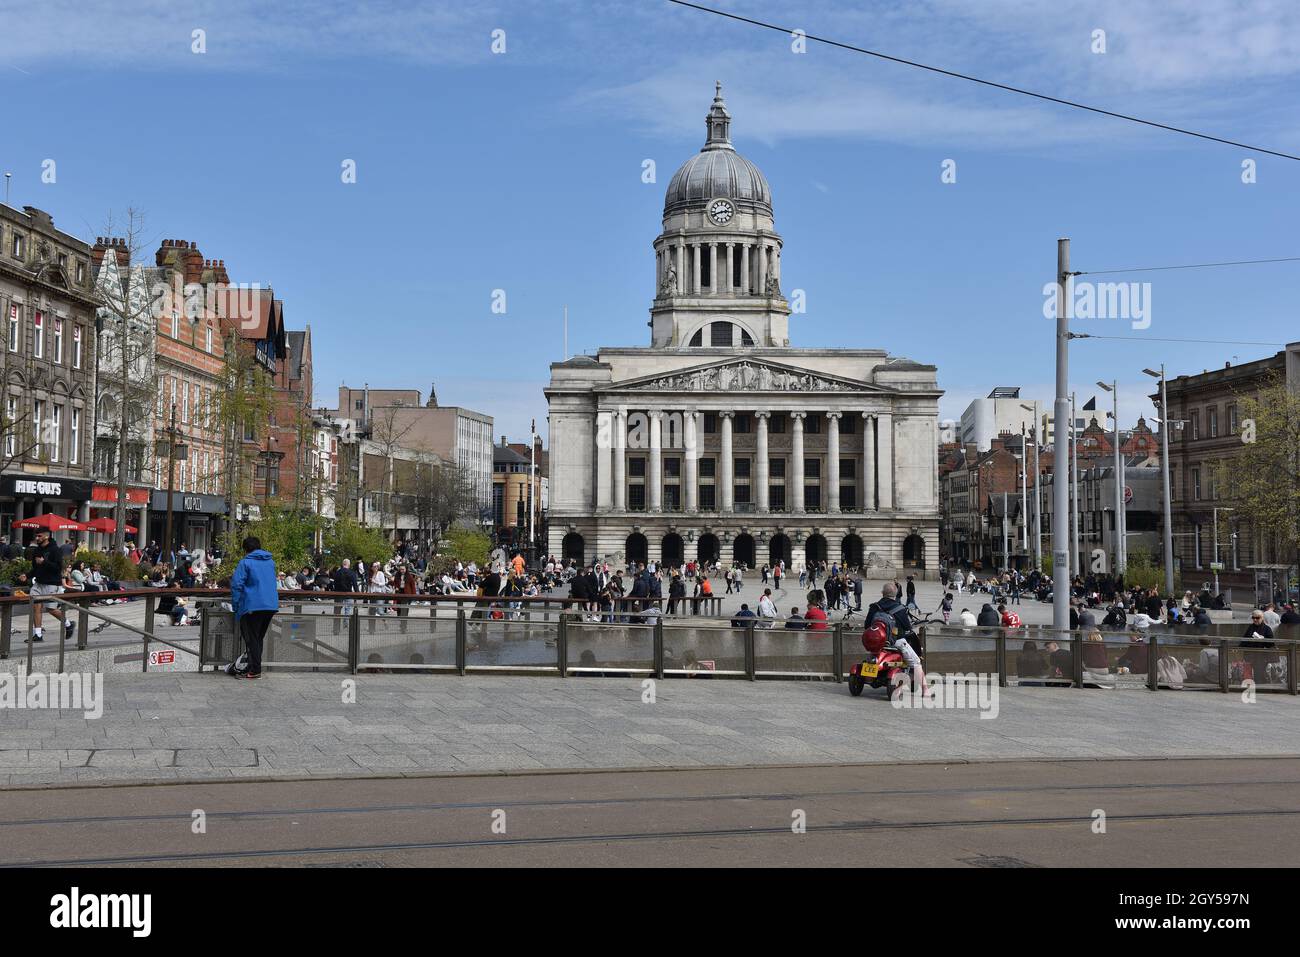 The Nottingham Council House in Nottingham city centre acting as a backdrop to Nottingham's Old Market Square, which is in the foreground. Stock Photo